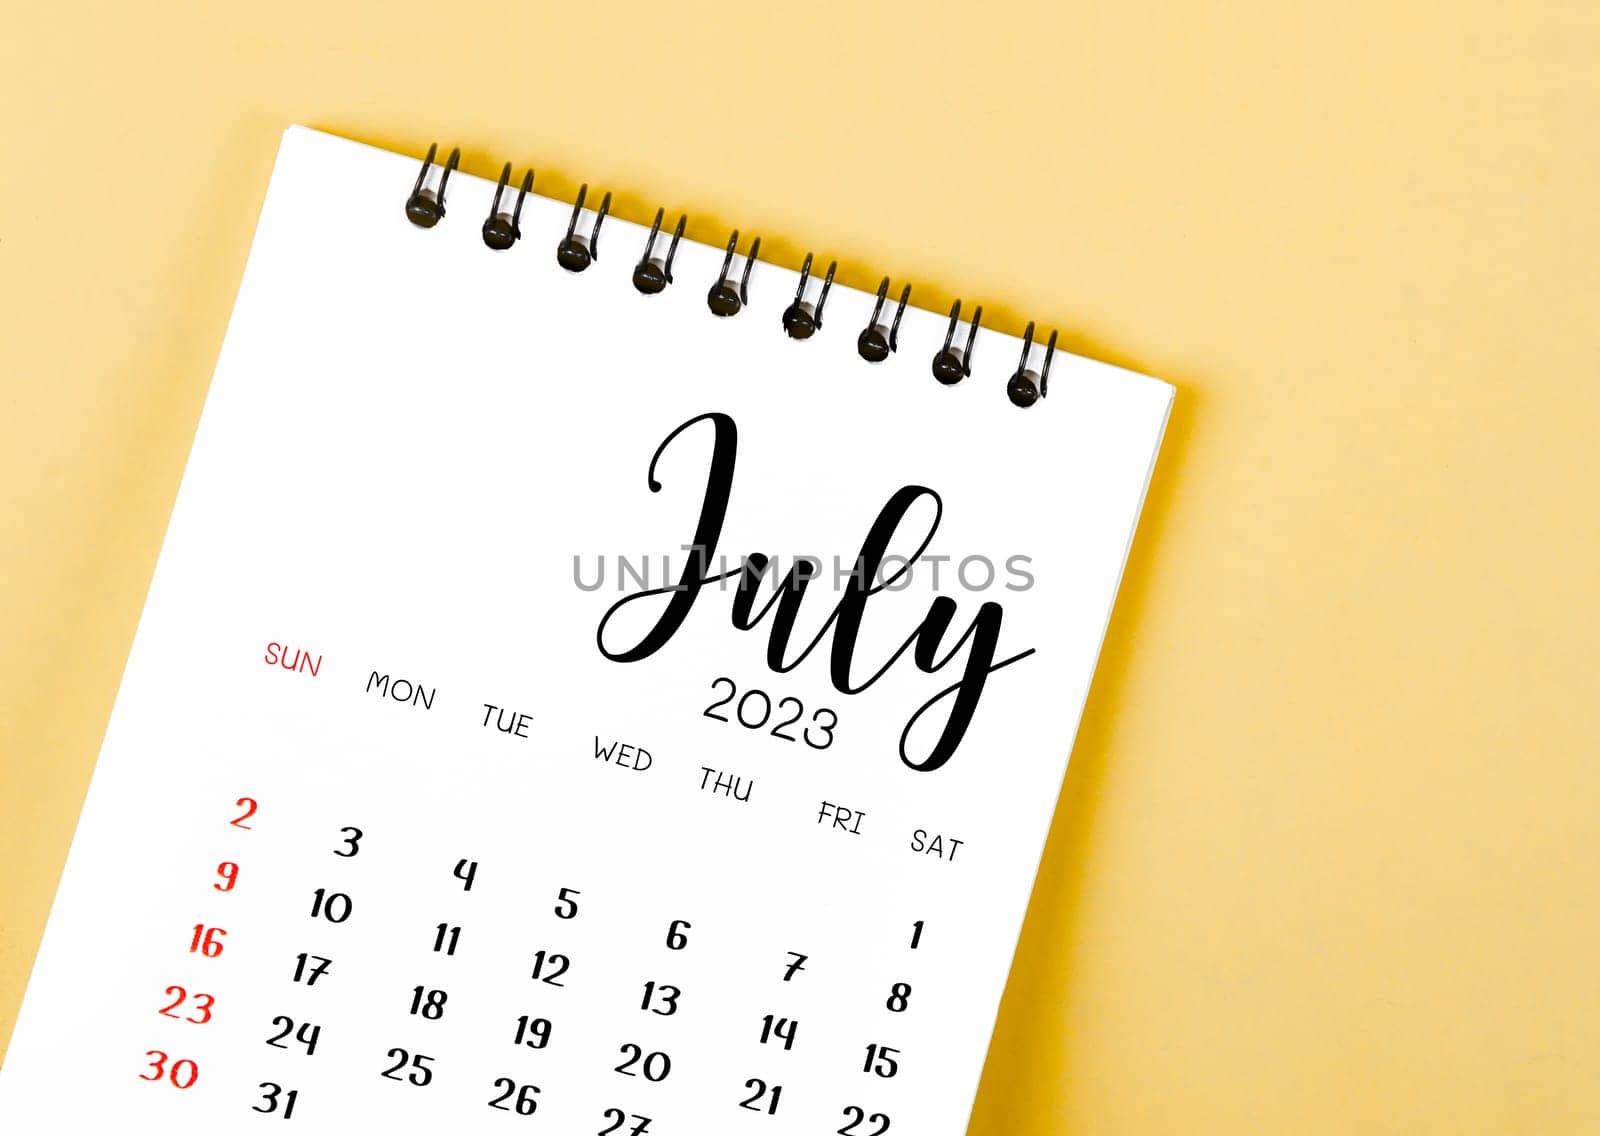 July 2023 Monthly desk calendar for 2023 year on yellow background.